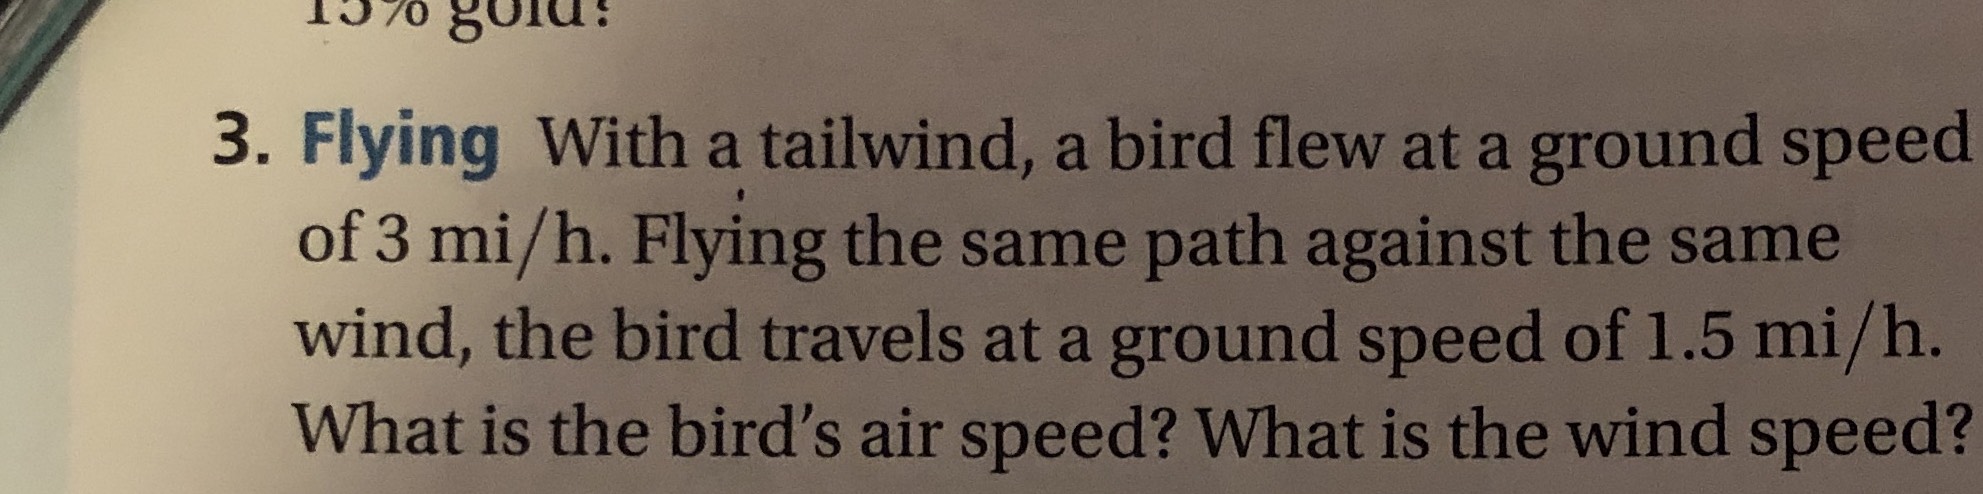 3. Flying With a tailwind, a bird flew at a ground...